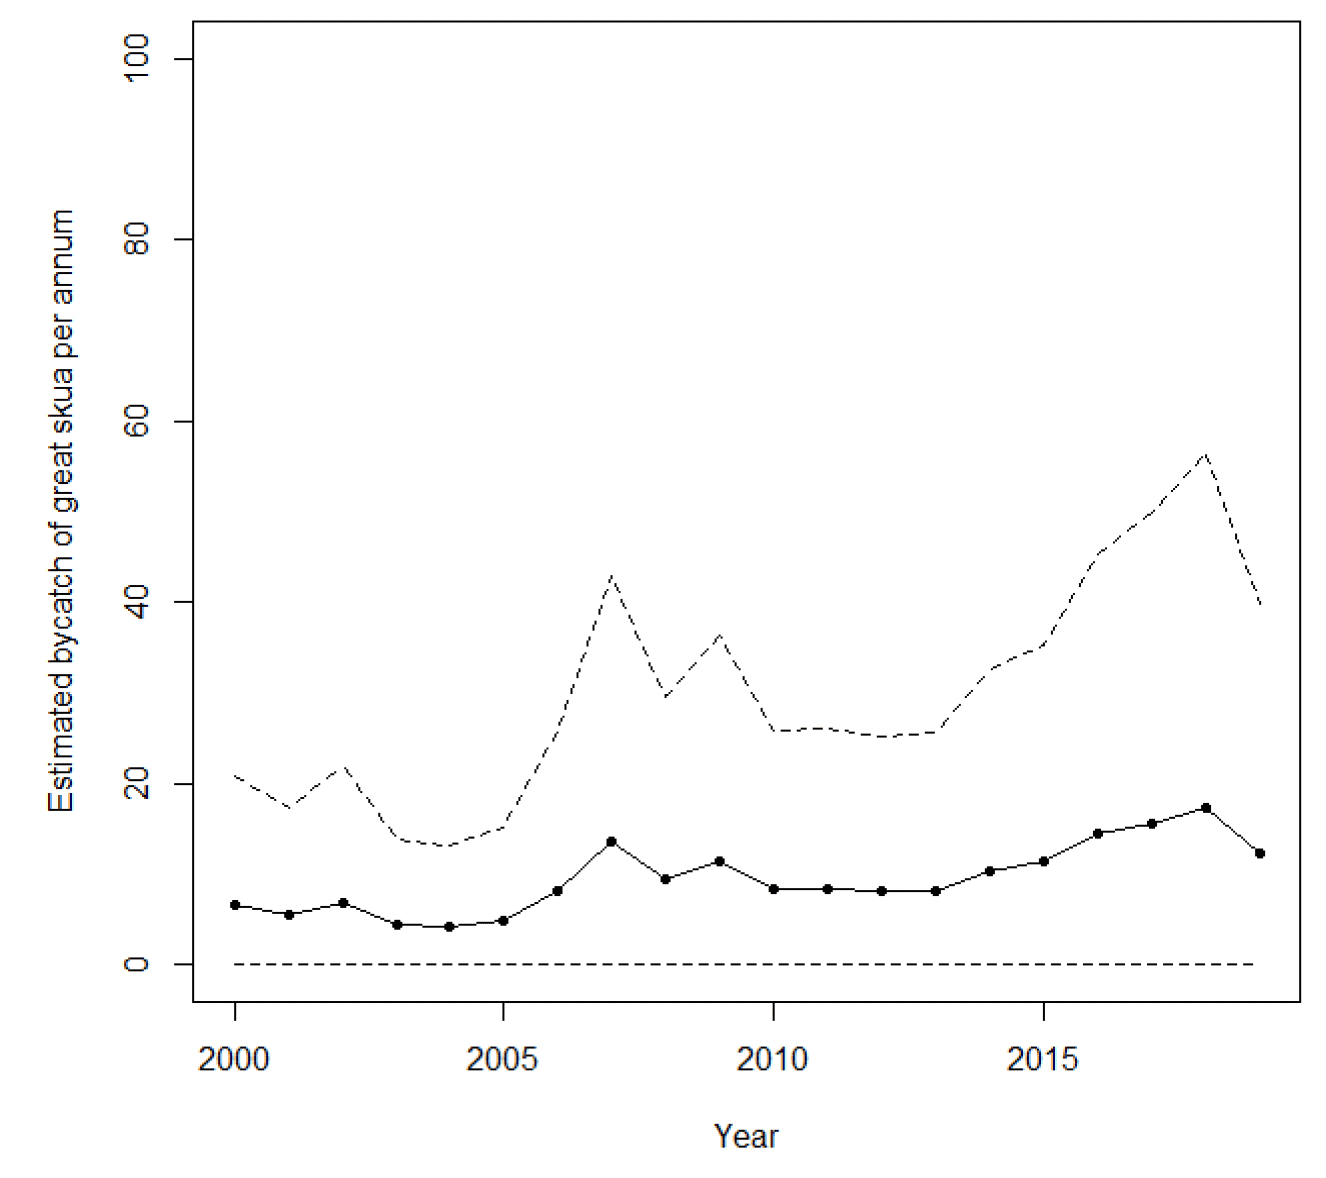 Solid trend line of the annual estimated bycatch of great skuas, with dashed lines representing upper and lower confidence limits. Trend line increased slightly from less than ten in 2000 to just over ten in later years.